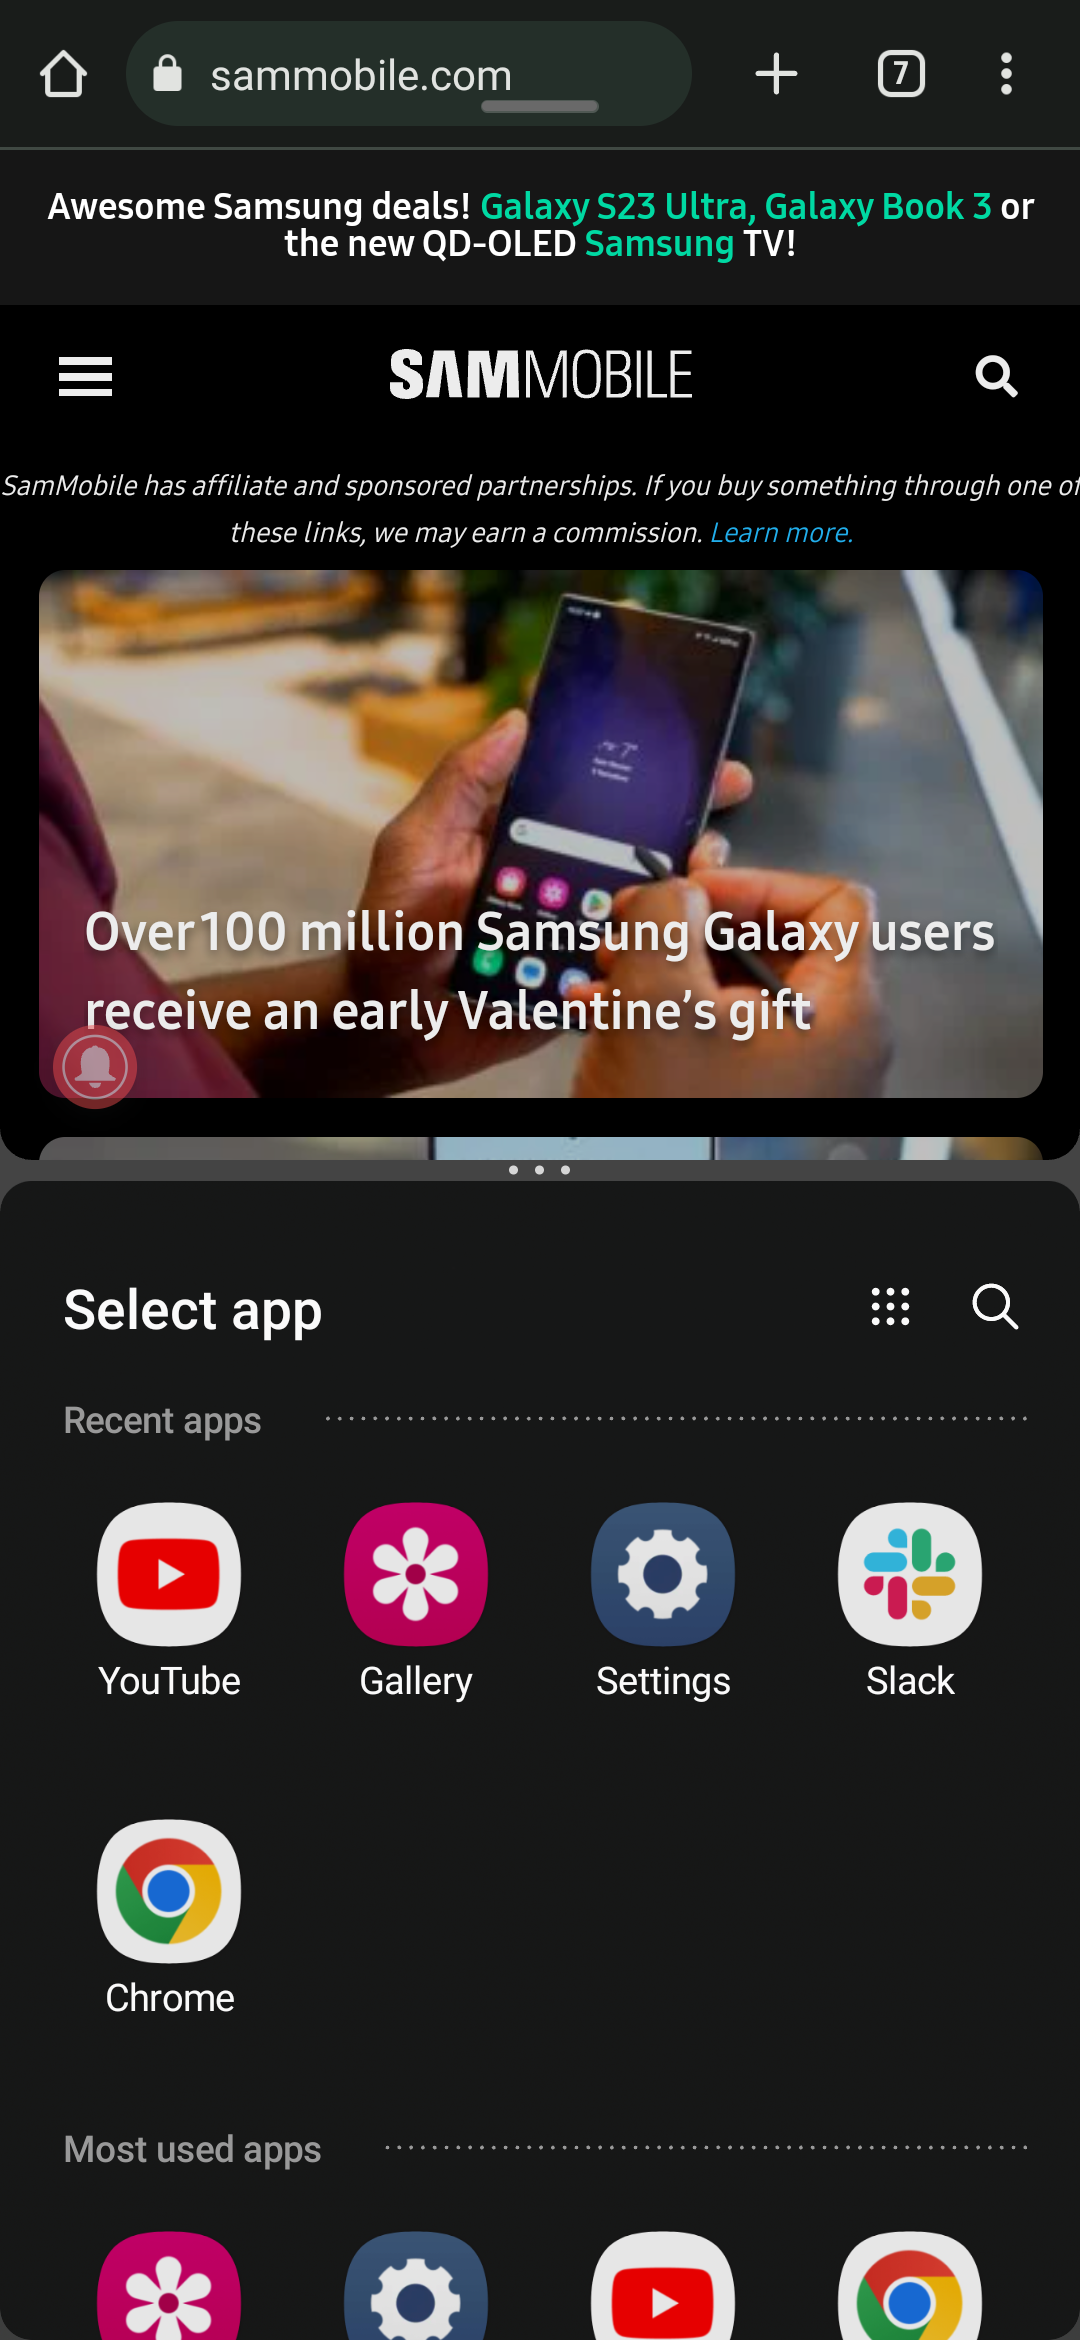 Samsung One UI: The Best Hidden Features to Master your Galaxy Smartphone